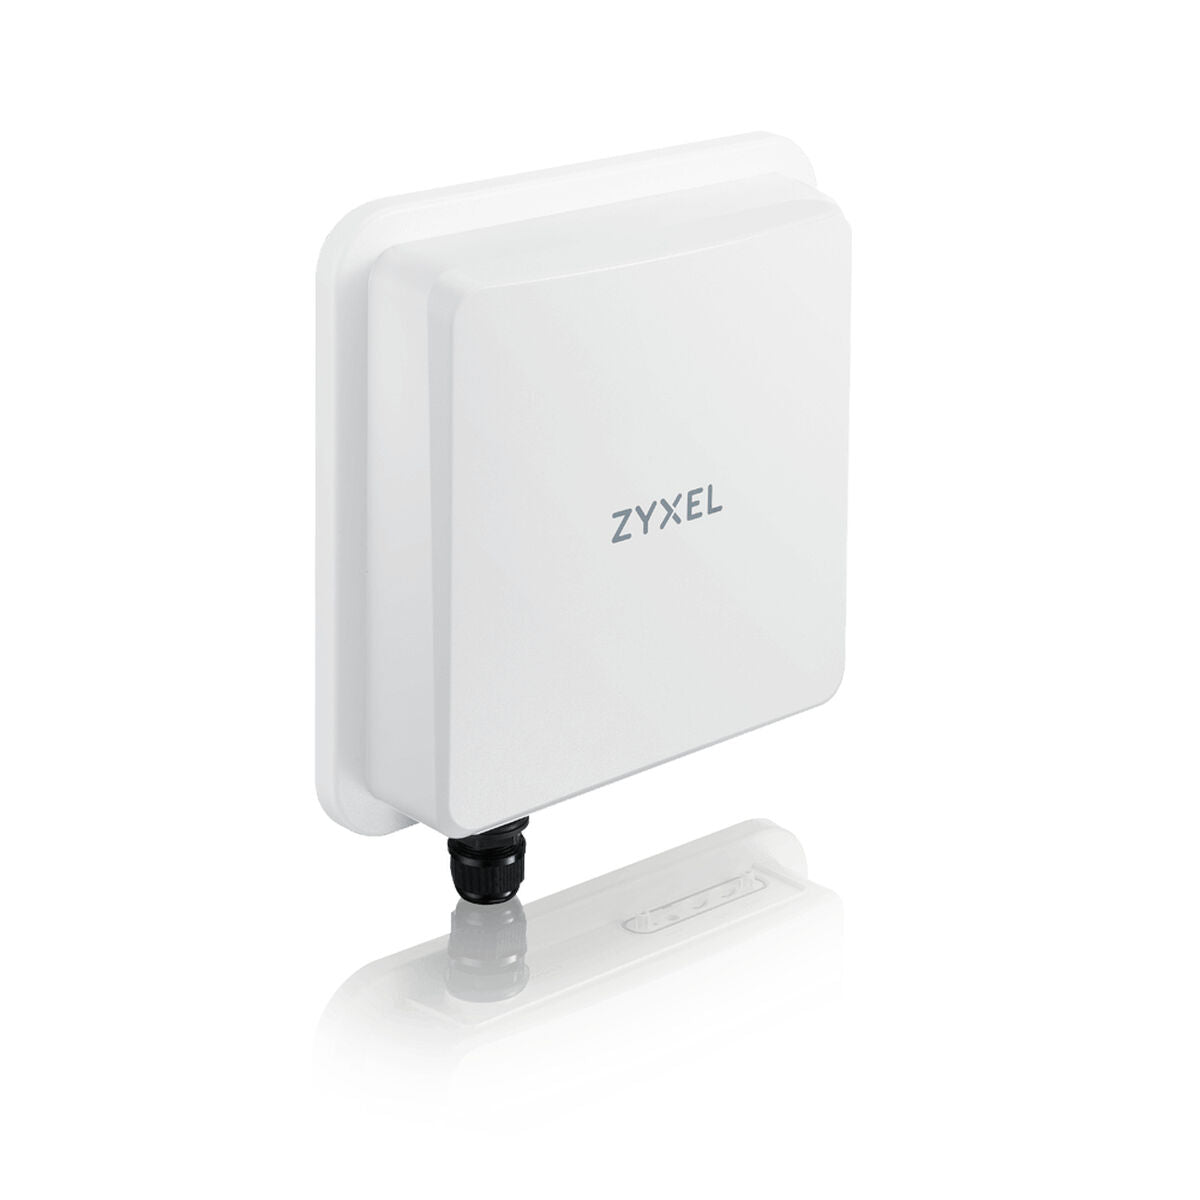 Router ZyXEL R707-M2, ZyXEL, Computing, Network devices, router-zyxel-r707-m2, Brand_ZyXEL, category-reference-2609, category-reference-2803, category-reference-2826, category-reference-t-19685, category-reference-t-19914, Condition_NEW, networks/wiring, Price_600 - 700, Teleworking, RiotNook